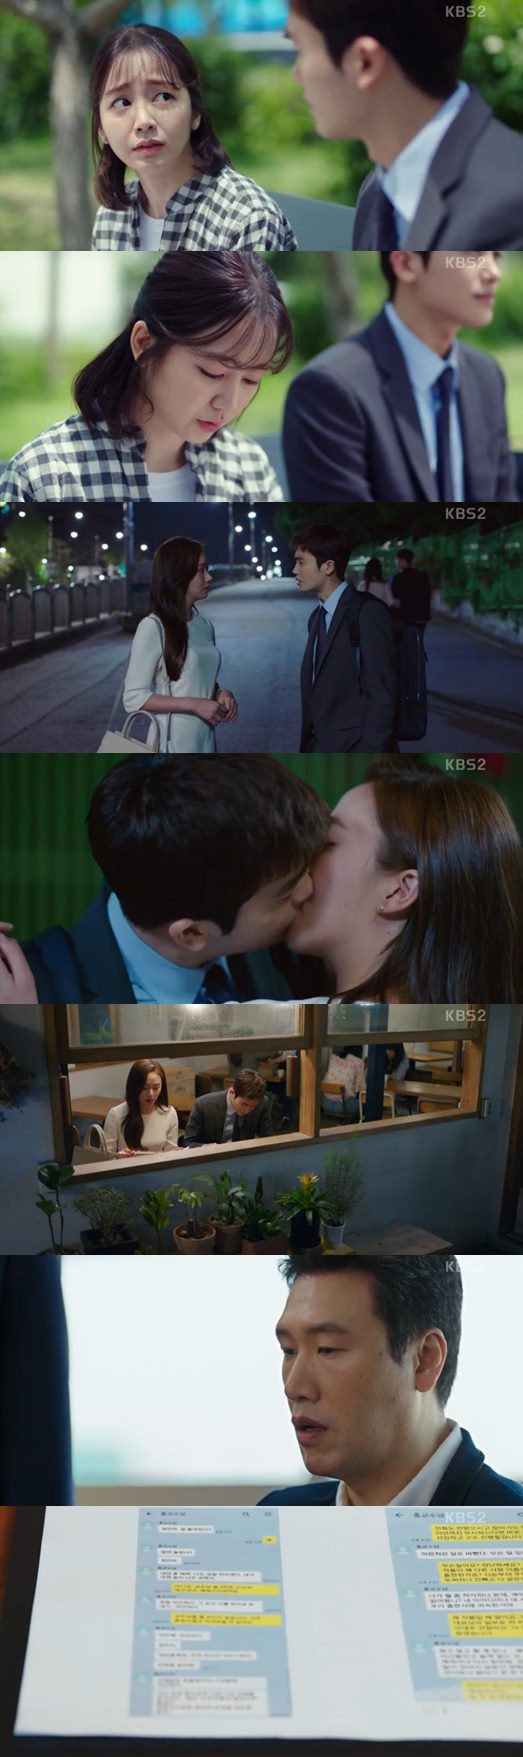 Suits dealt with the sexual assault of a physically powerless woman.Among them, Park Hyung-sik and Ko Sung-hee, co-workers who spend a lot of time together, started their full-scale love affair.In the 11th KBS2 drama Suits (playplayed by Kim Jung-min and director Kim Jin-woo) broadcasted on the 30th night, Choi Kang Suk (Jang Dong-gun), a lawyer of Korean law firm legend, and Go Yeon Woo (Park Hyung-sik), a law firm Kang An-ham Kang Ha-yeon (Jin Hee-kyung), Hong Da-ham (Chae Jung-an) Kim Ji-na (Ko Sung-hee) The legal story surrounding Chae Geun-sik (Choi Kwi-hwa) and others was drawn.Kang and Ham were confused when Ham (Kim Young-ho) returned suddenly. Kang Suk and Kang Ha-yeon started to take measures.Kang Suk tried to prevent Ham from returning to his past history, saying, Your clumsy threats make me want to return.Among them, Yeon Woo got the opportunity to be recognized for his ability by taking the first solo case after joining the law firm.Yeon Woo was a lawyer for the publisher, so he had to emotionally confront a bookstore employee who was at odds with the publisher over copyright issues.The humane Yeon Woo gave the bookstore staff time to tell them what was going on. I showed my item to the publisher two years ago and was offered a book.The moment I thought it was my chance to live and never be again was a lifetime-old hurt, he said, and I want you to make up for the past that has trampled on my life.Yeon Woo told the publisher to persuade the bookstore staff to pay some money, but the staff said, It is not solved by money.You dont know what Ive really taken. The case went on in a surprising way: the bookstore employee was sexually assaulted by a publisher.Im just an aspiring writer, the employee said, and who would believe me?A series of situations were also dramatic messages urging the change of compassion and social institutions for powerless women who did not have power.It was the social ills themselves that were indispensable in the blind spot that the weak were sexually assaulted by perpetrators using power and hierarchy.This, of course, was a major reminder of the Me Too movement, a sexual assault campaign that has been launched since last year.Yeon Woo has started to develop his ability to work as a lawyer, dealing with copyright issues and sexual assault issues separately.It was Kim Ji-na who was always with Yeon Woo, who was sympathetic to the pain and circumstances of a woman who had been sexually assaulted.As they walked along the road together, they gradually showed each other the questions.Gina kissed Yeon Woo a little first, and Yeon Woo also grabbed her again and kissed her, and they shared the intimate part of the divorce family and ate the night together.Gina said, When I was a child, I thought it was hard because I had a lot of thoughts.Kim also came to be appointed as a strong and strong lawyer in the prosecution. Kang Suk put Moon Hee as an attorney for Chae Geun-sik.Moon Hee, who was not a hurdle, fought a pride battle with Chae Geun-sik as soon as he came to work, and predicted a blue.Kang Suk suggested that Moon Hees private weaknesses and Moon Hee should work with Moon Hee by reaching consensus based on the situation where Moon Hee knows the identity of Yeon Woo.